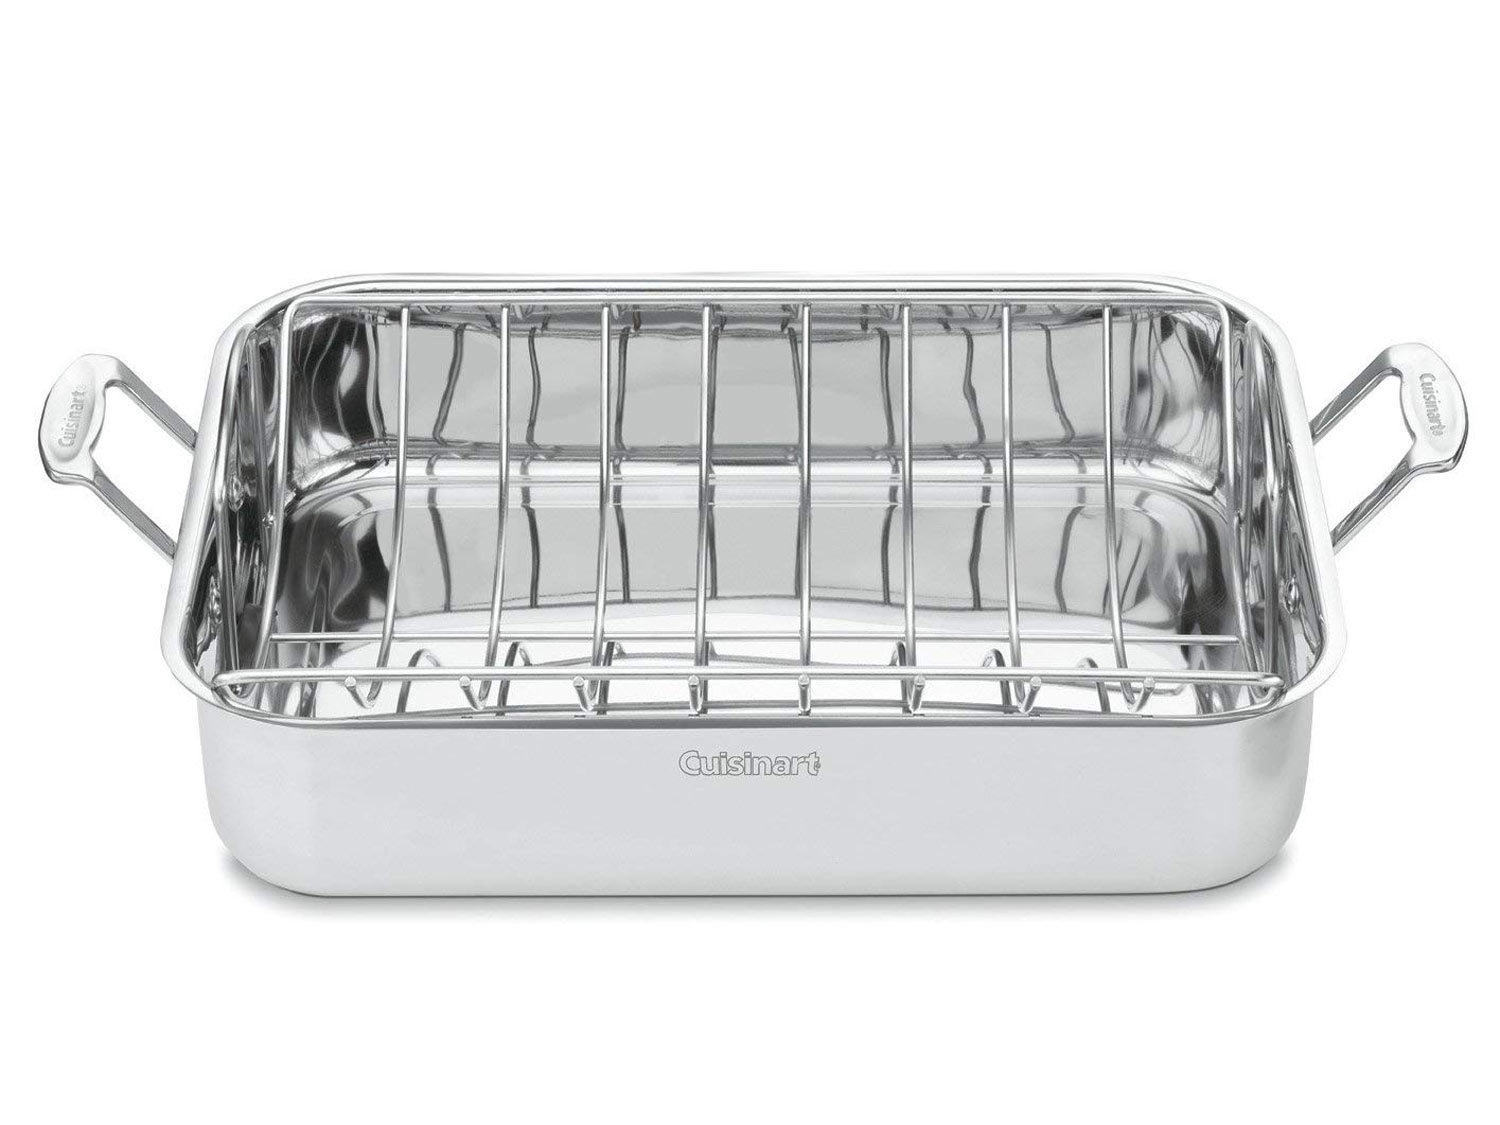 Cuisinart 7117-16UR Chef's Classic Stainless 16-Inch Rectangular Roaster with Rack